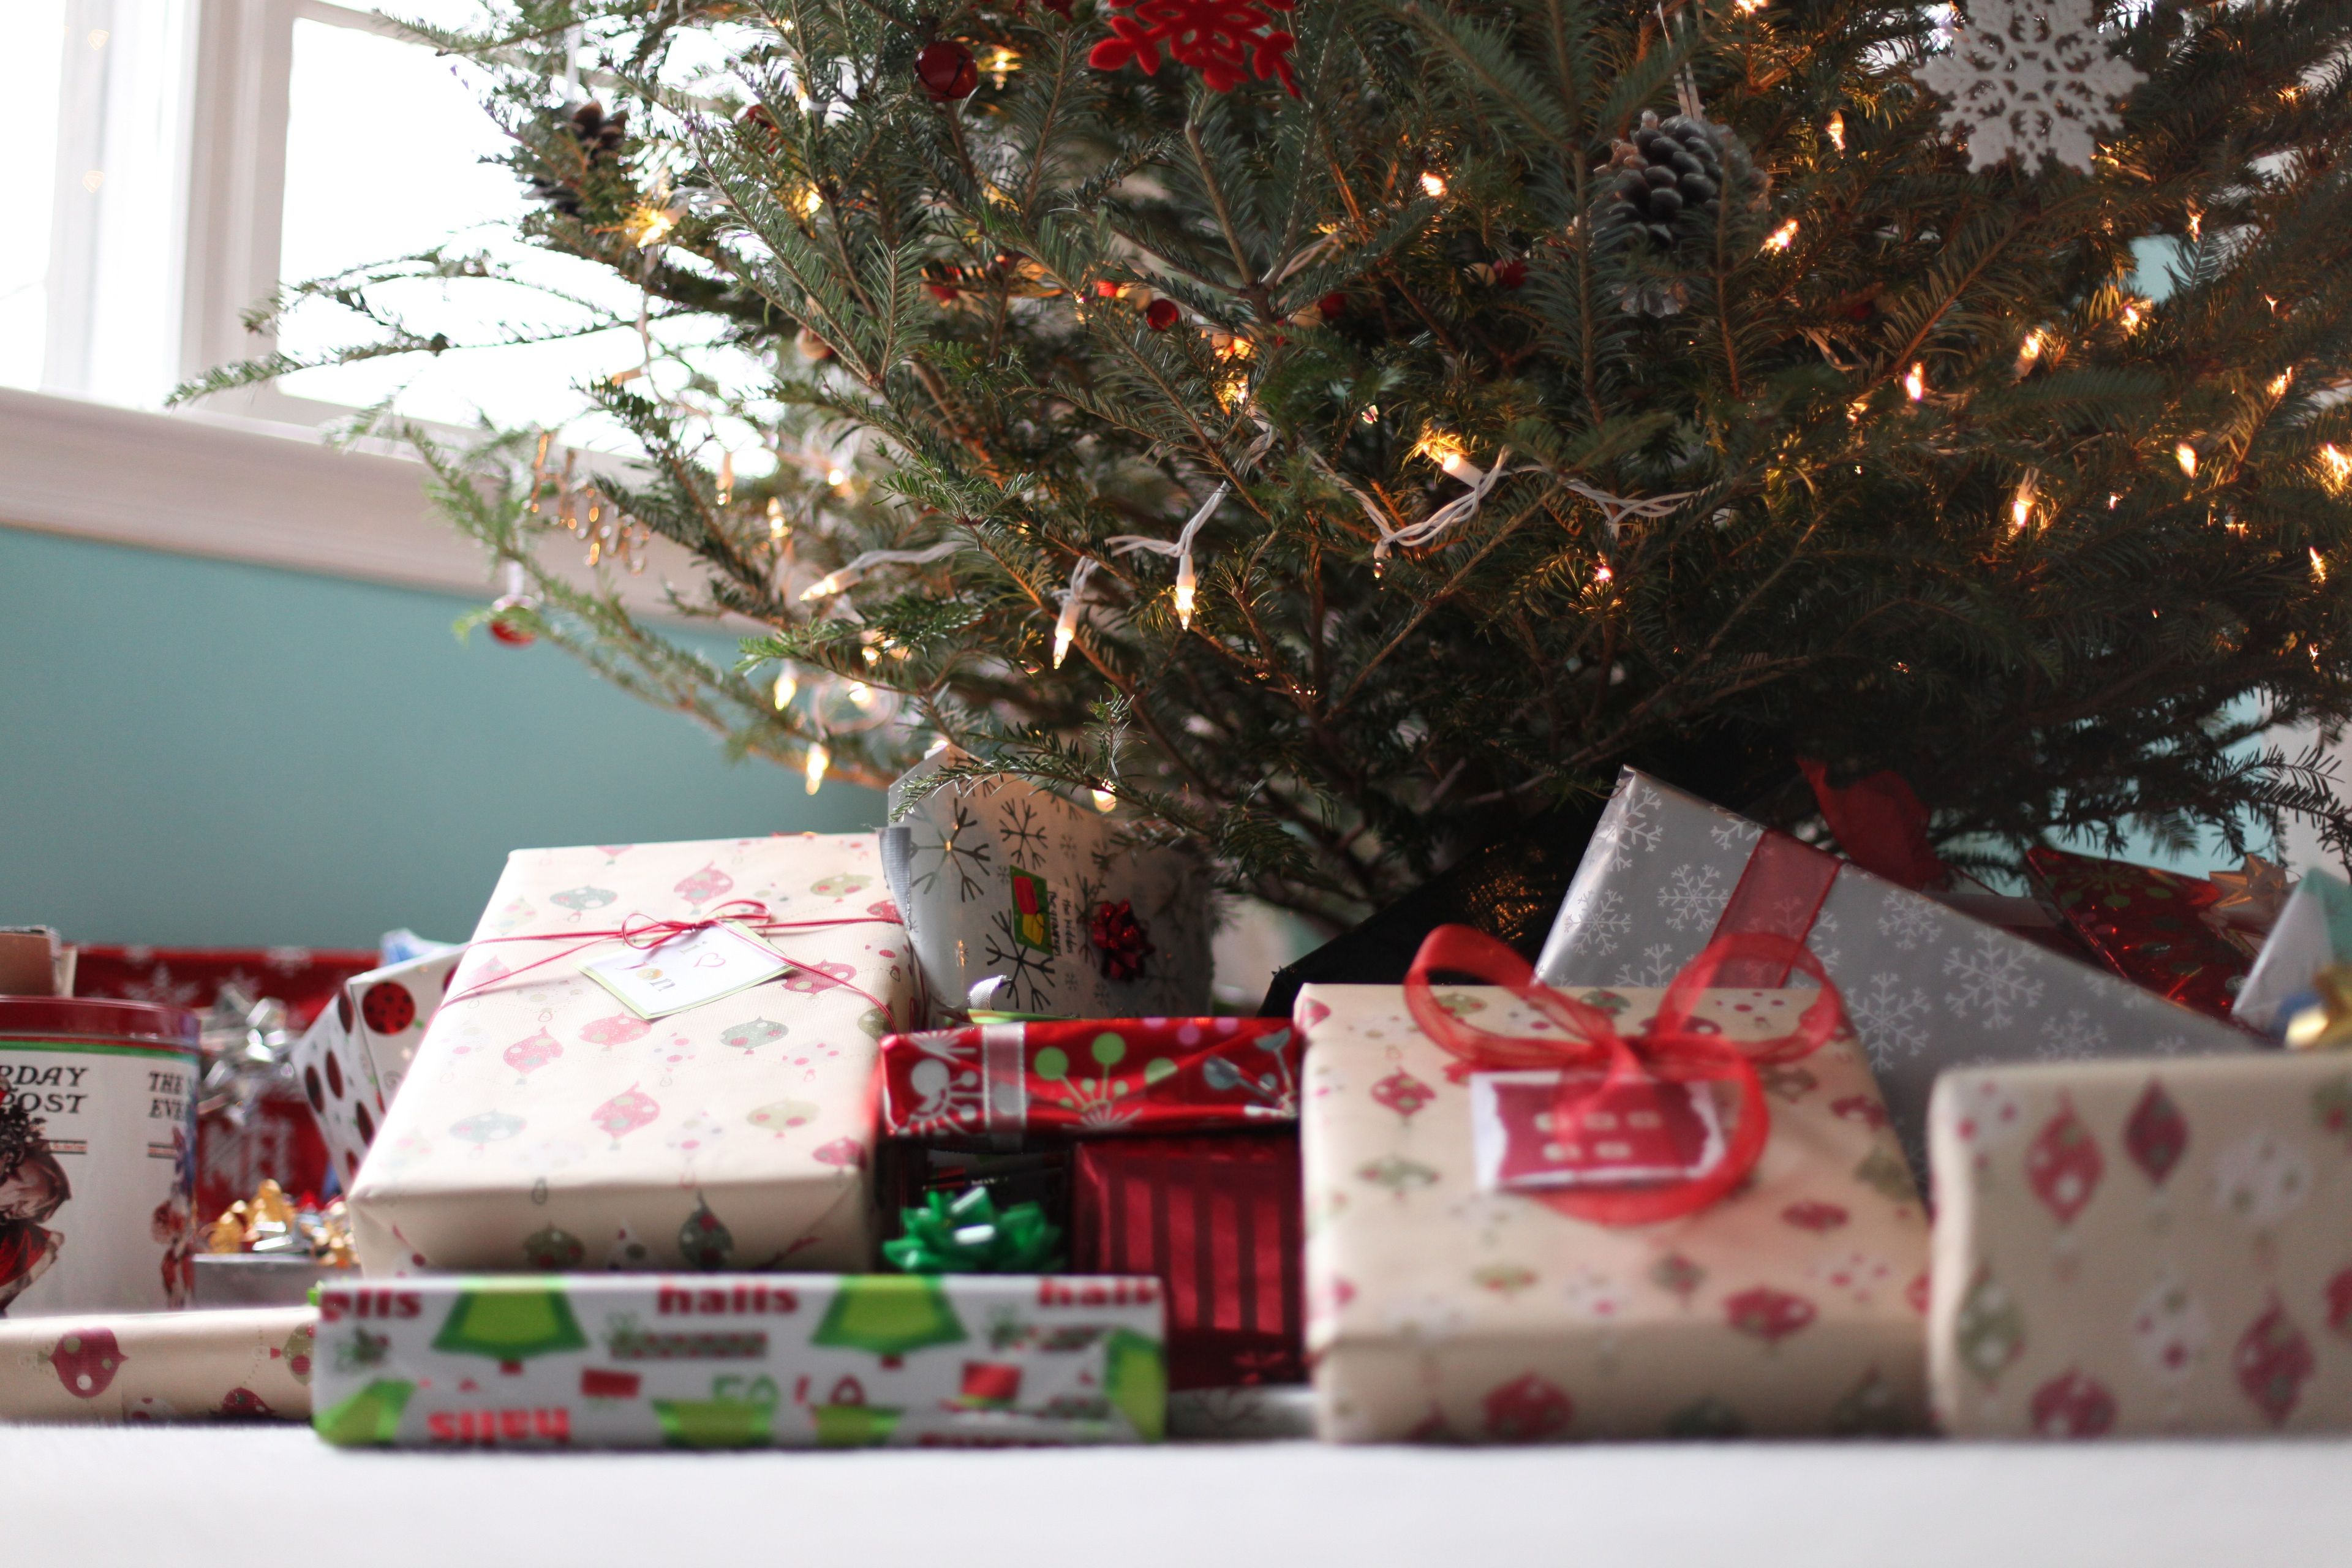 Wrapped gifts under a fresh Christmas tree.